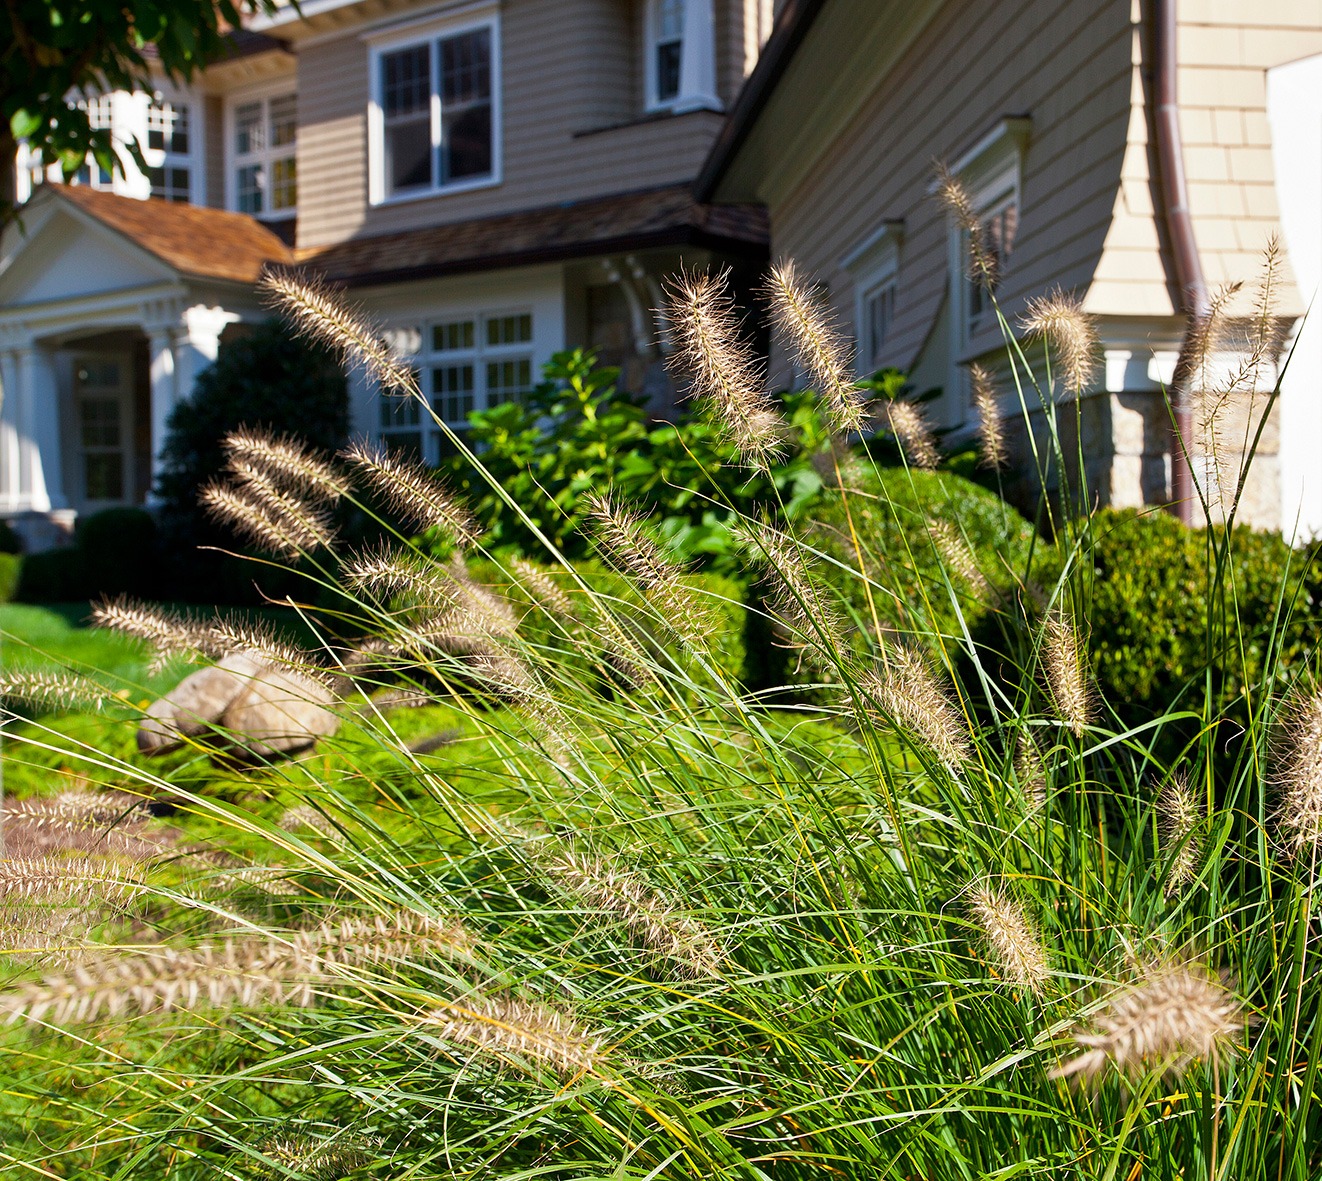 Tall ornamental grasses in focus at the forefront, with a blurred traditional two-story house and landscaped lawn in the background, on a sunny day.